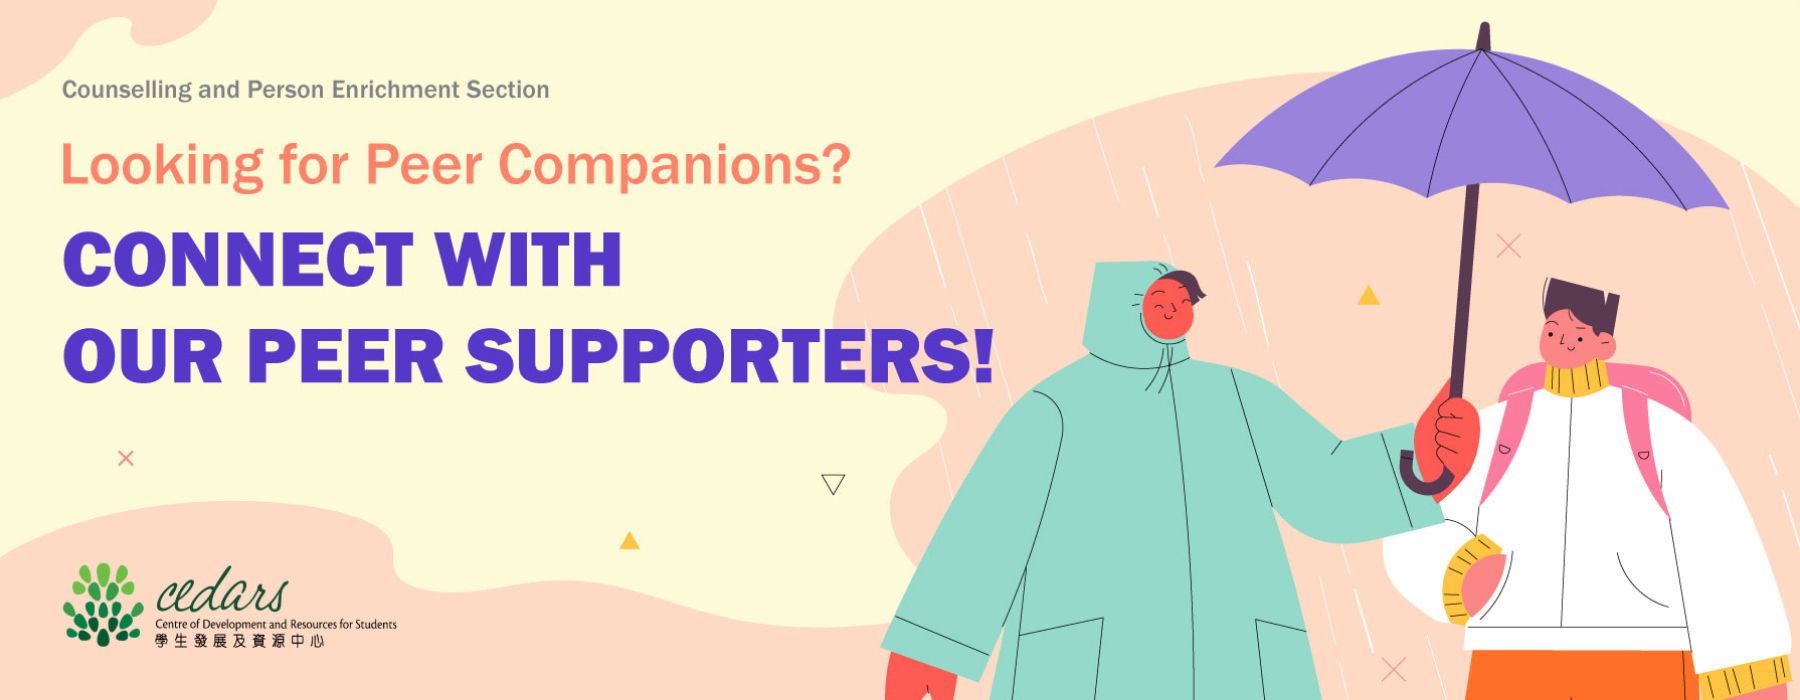 Connect with peer supporters